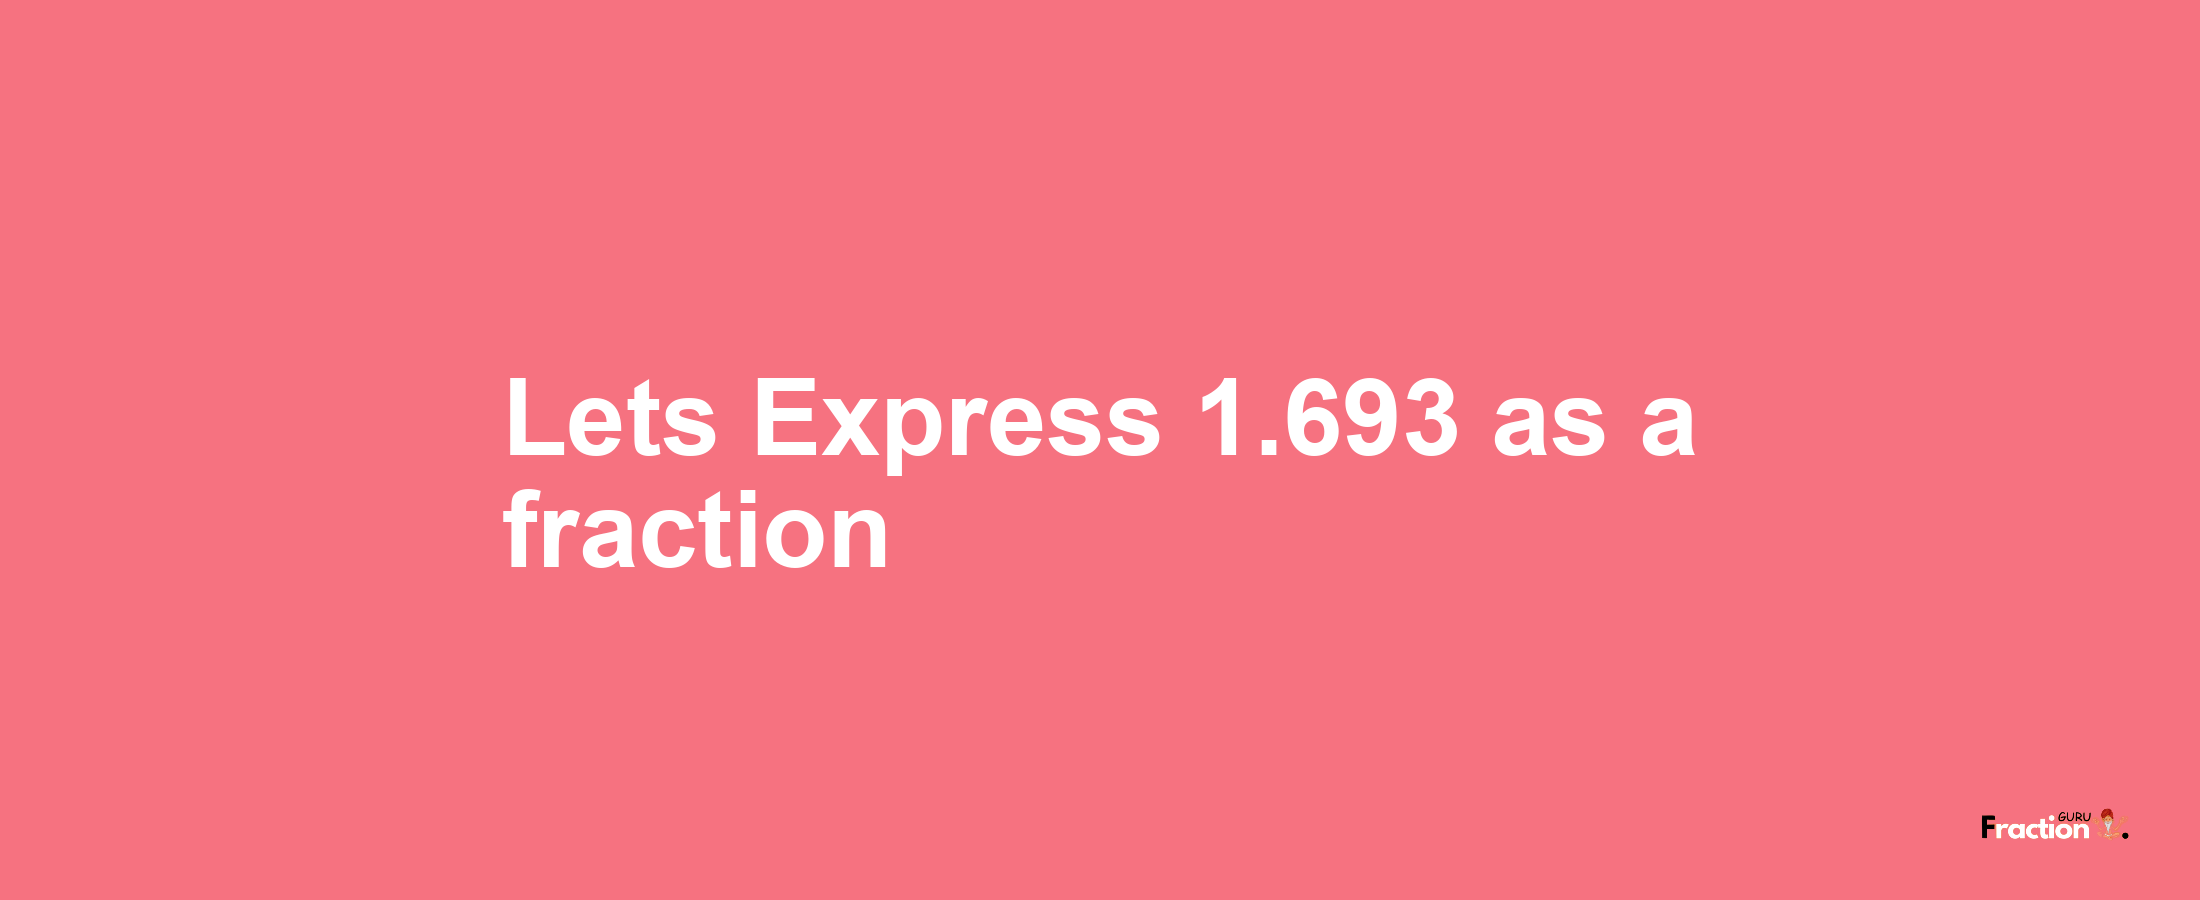 Lets Express 1.693 as afraction